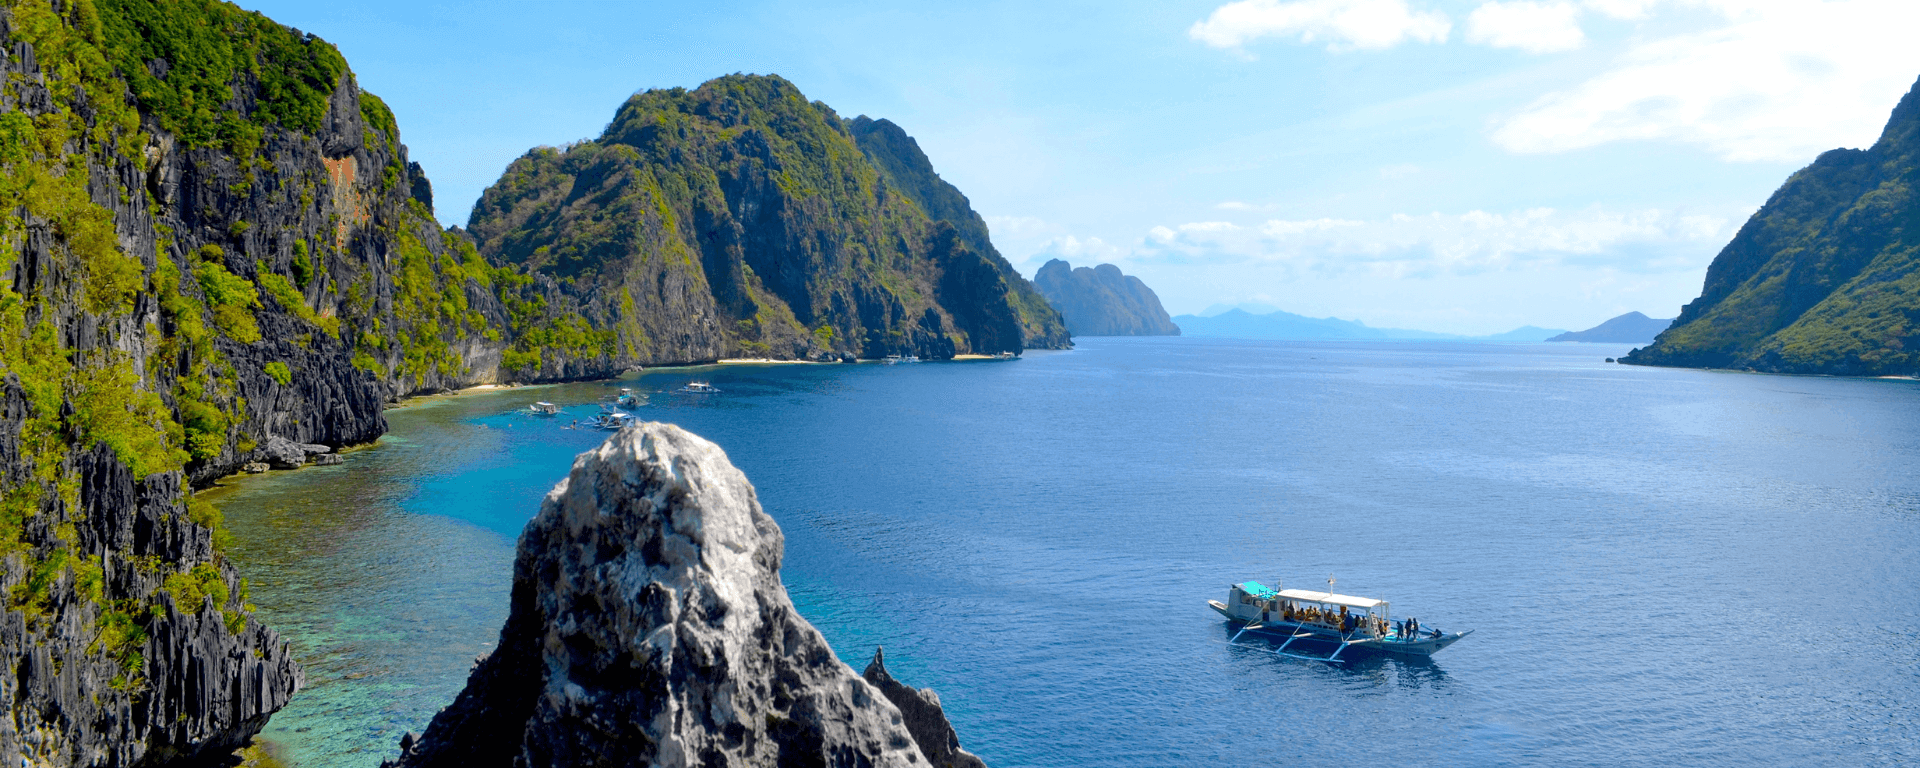 Philippines Tourist Attractions